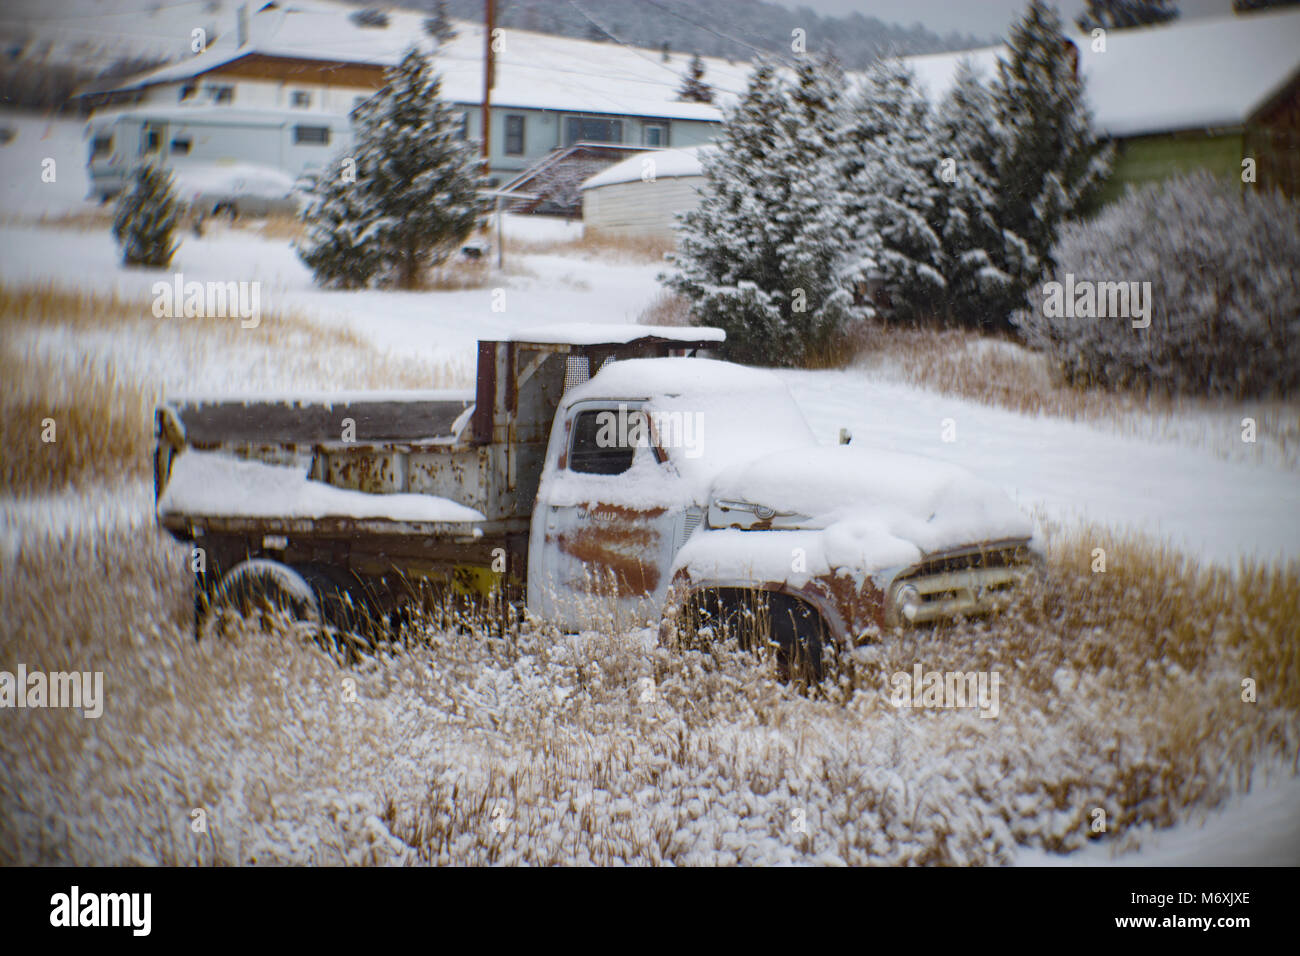 A 1953 Ford dump truck, in a snow-covered field, in Philipsburg, Montana. Stock Photo